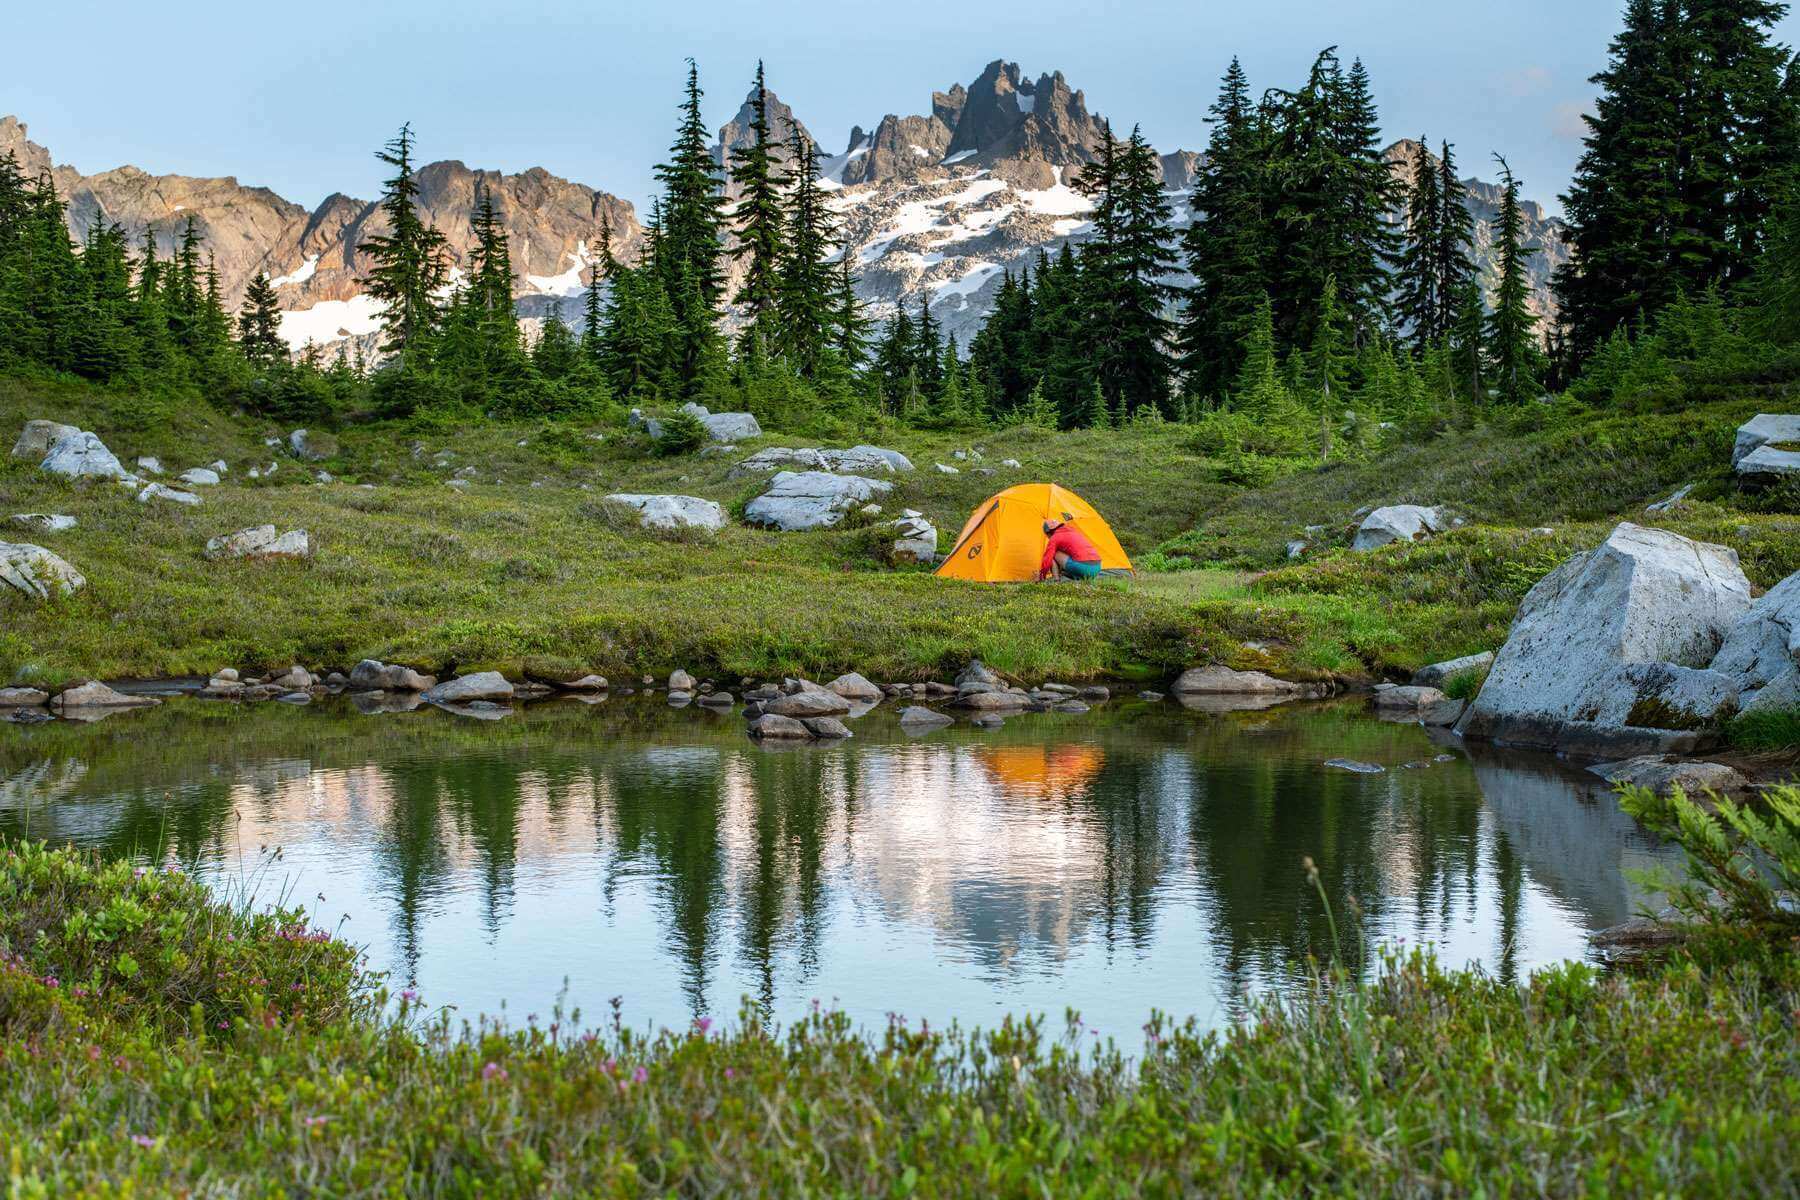 Hiking Trails In Washington - Yellow tent next to a lake with mountains in the background